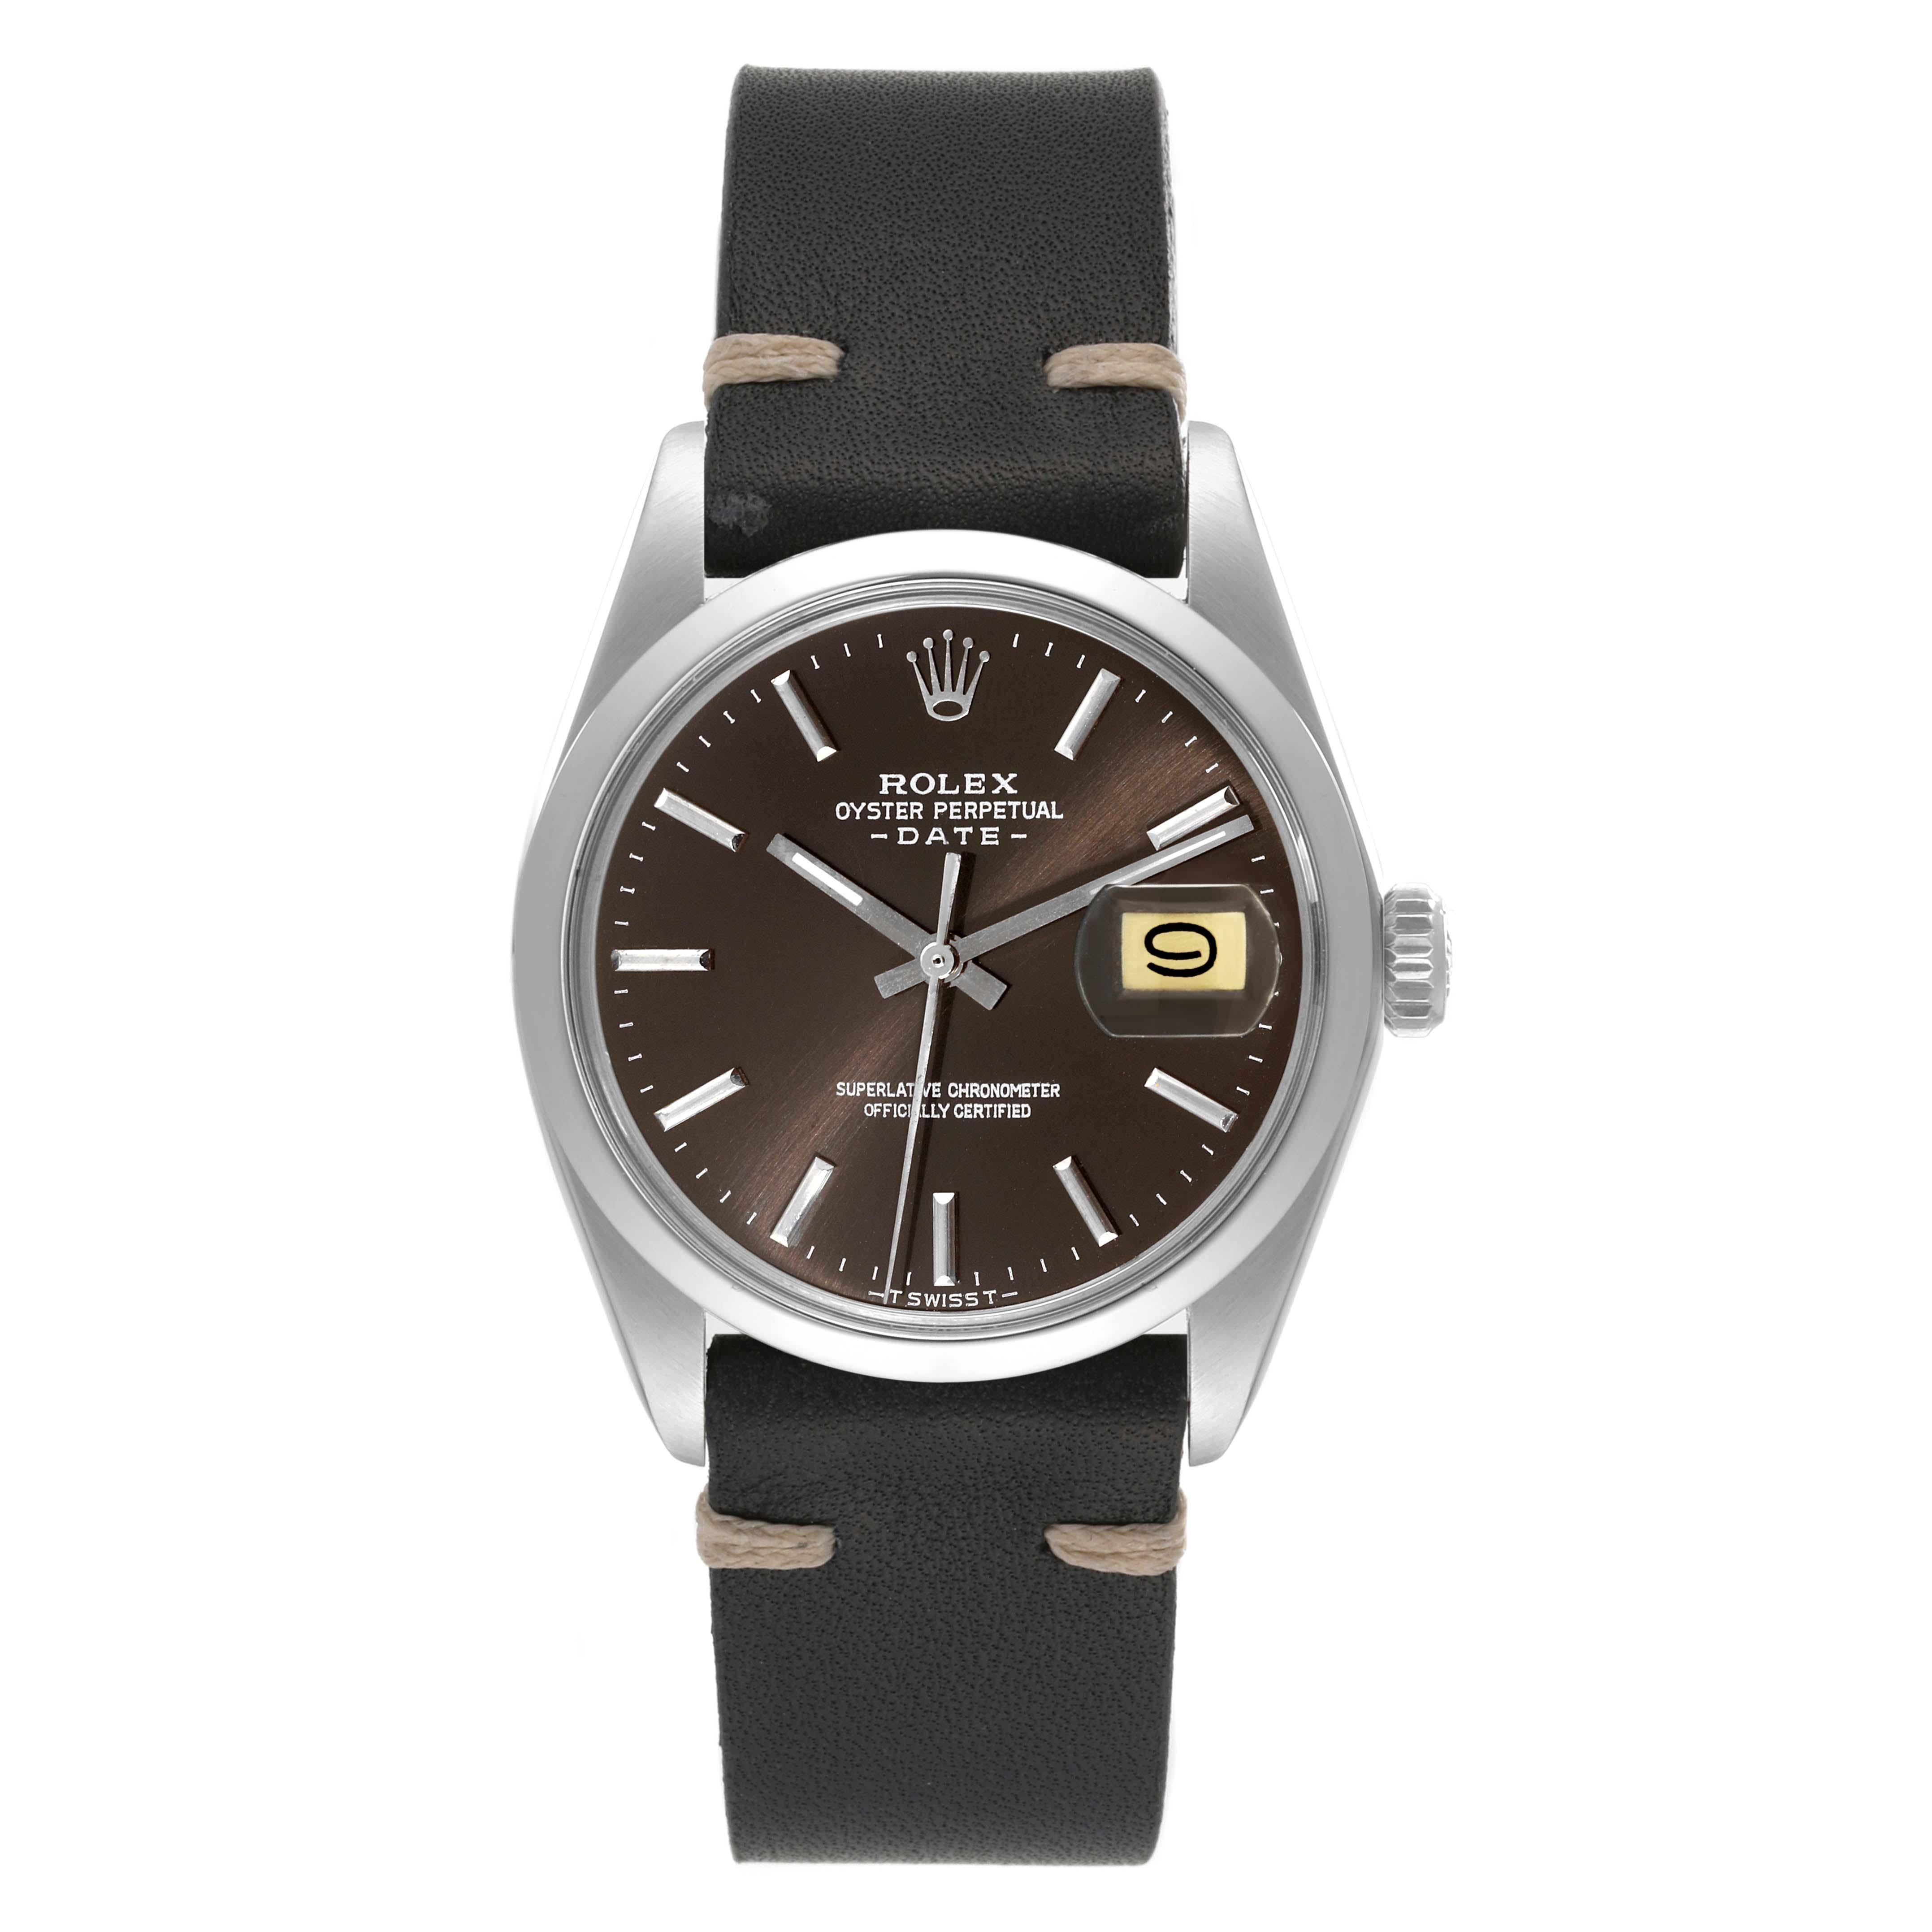 Rolex Date Brown Dial Steel Vintage Mens Watch 1500. Officially certified chronometer automatic self-winding movement. Stainless steel oyster case 34.0 mm in diameter. Rolex logo on the crown. Stainless steel smooth bezel. Acrylic crystal with